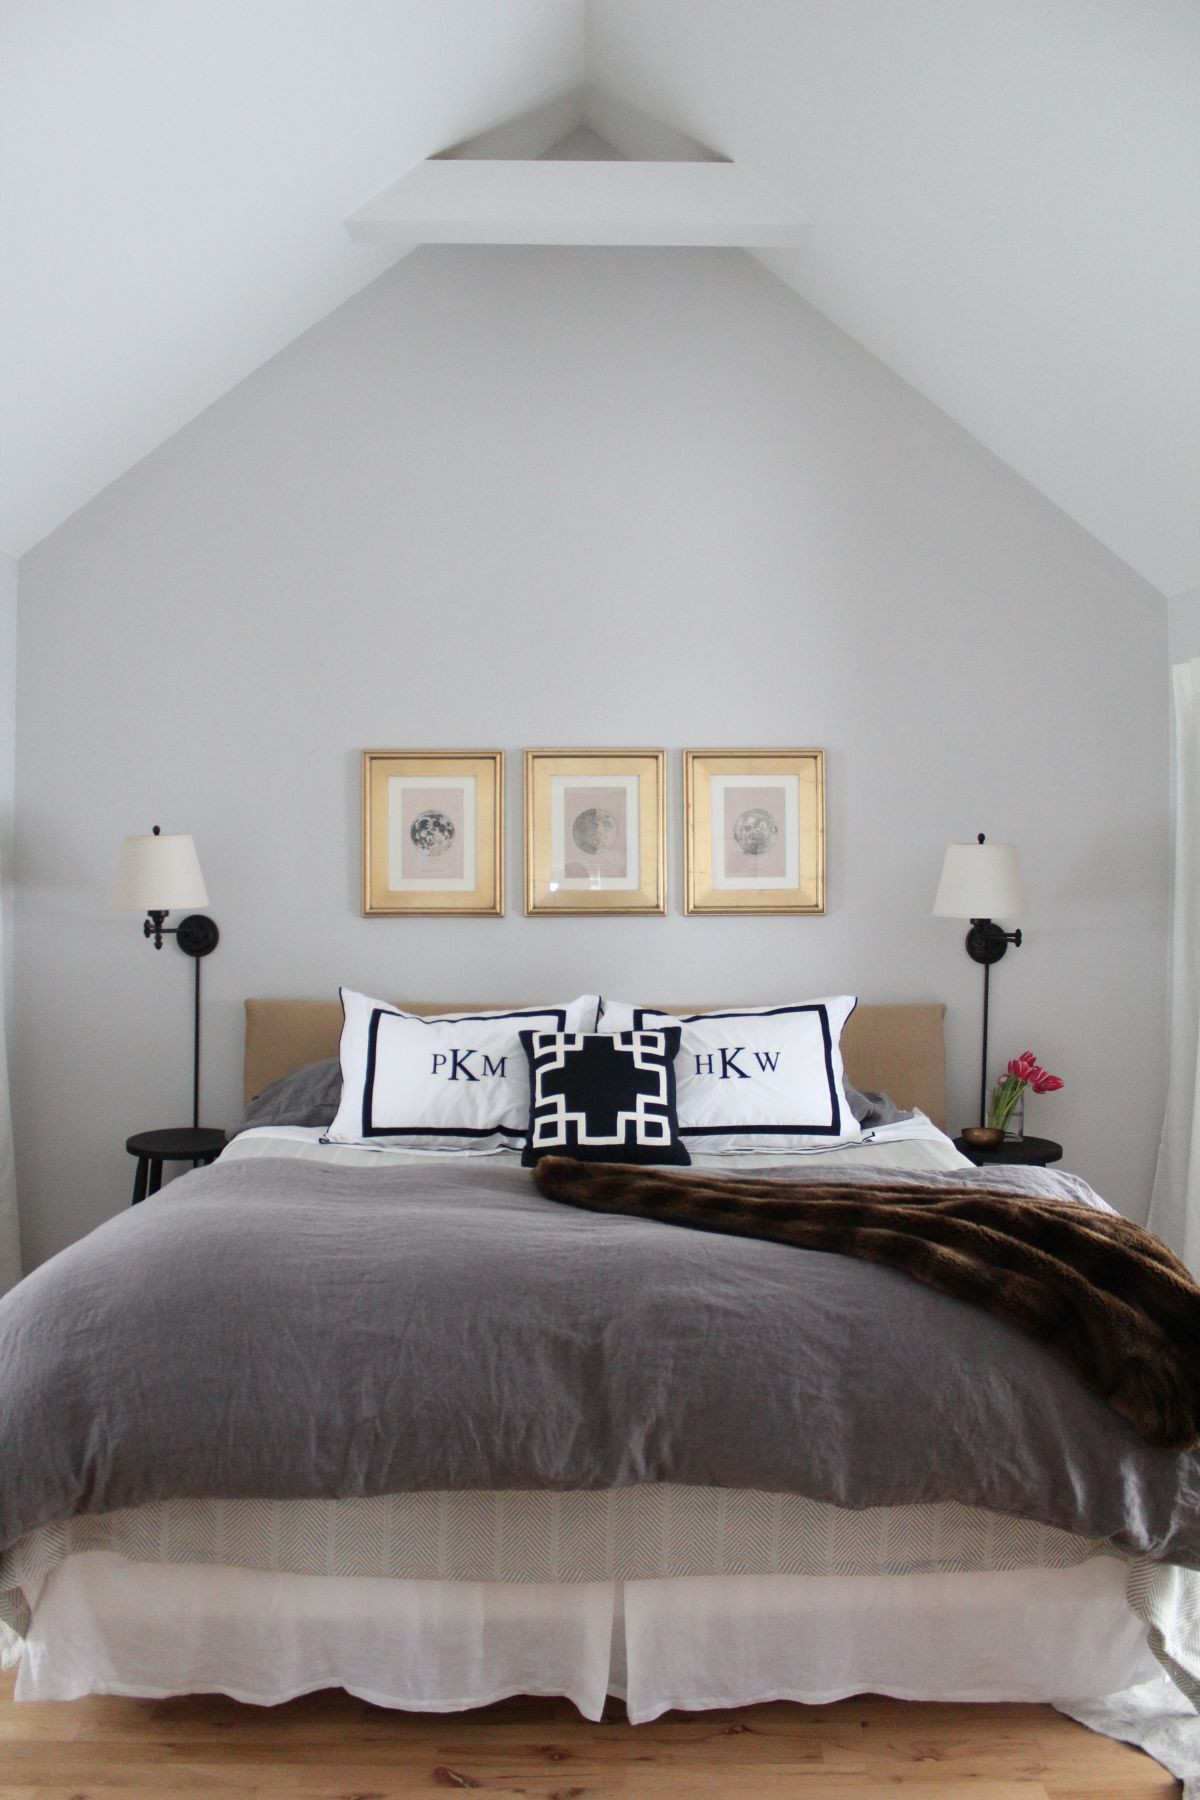 Neutral Colored Bedroom
 How to Use Neutral Colors without Being Boring A Room by